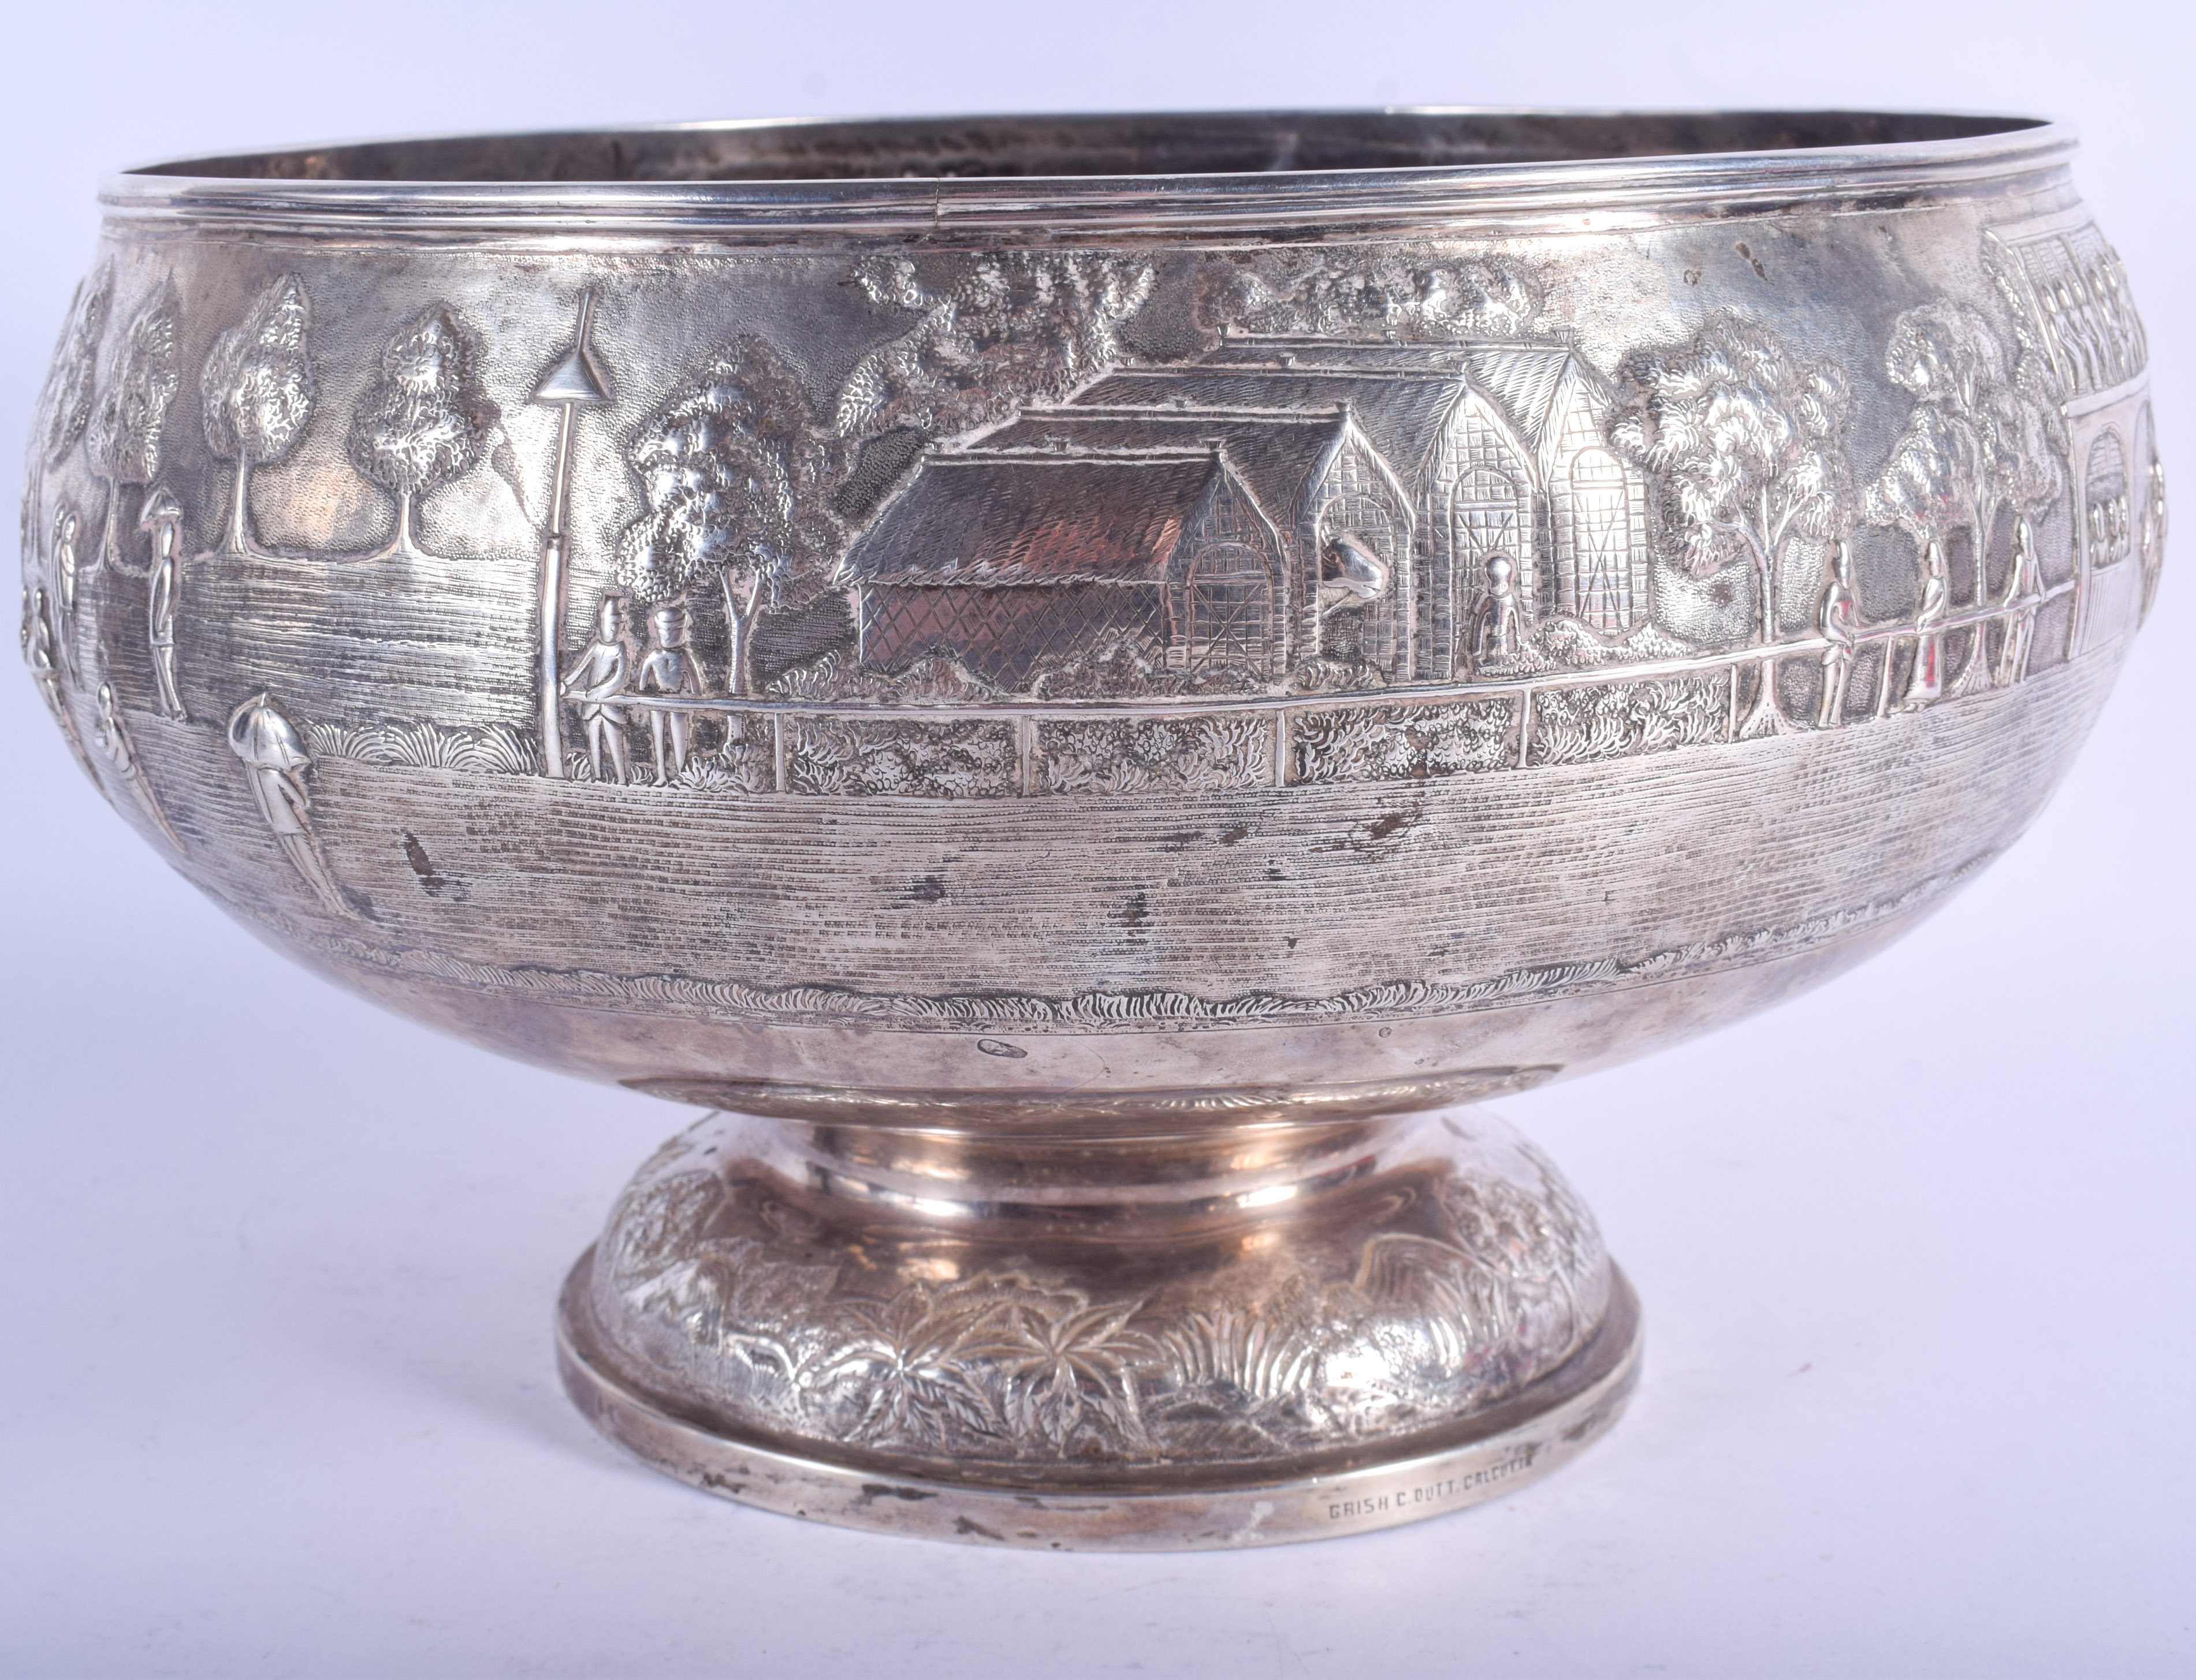 A GOOD 19TH CENTURY INDIAN COLONIAL KUTCH SILVER EMBOSSED BOWL decorated with figures within landsca - Image 4 of 6